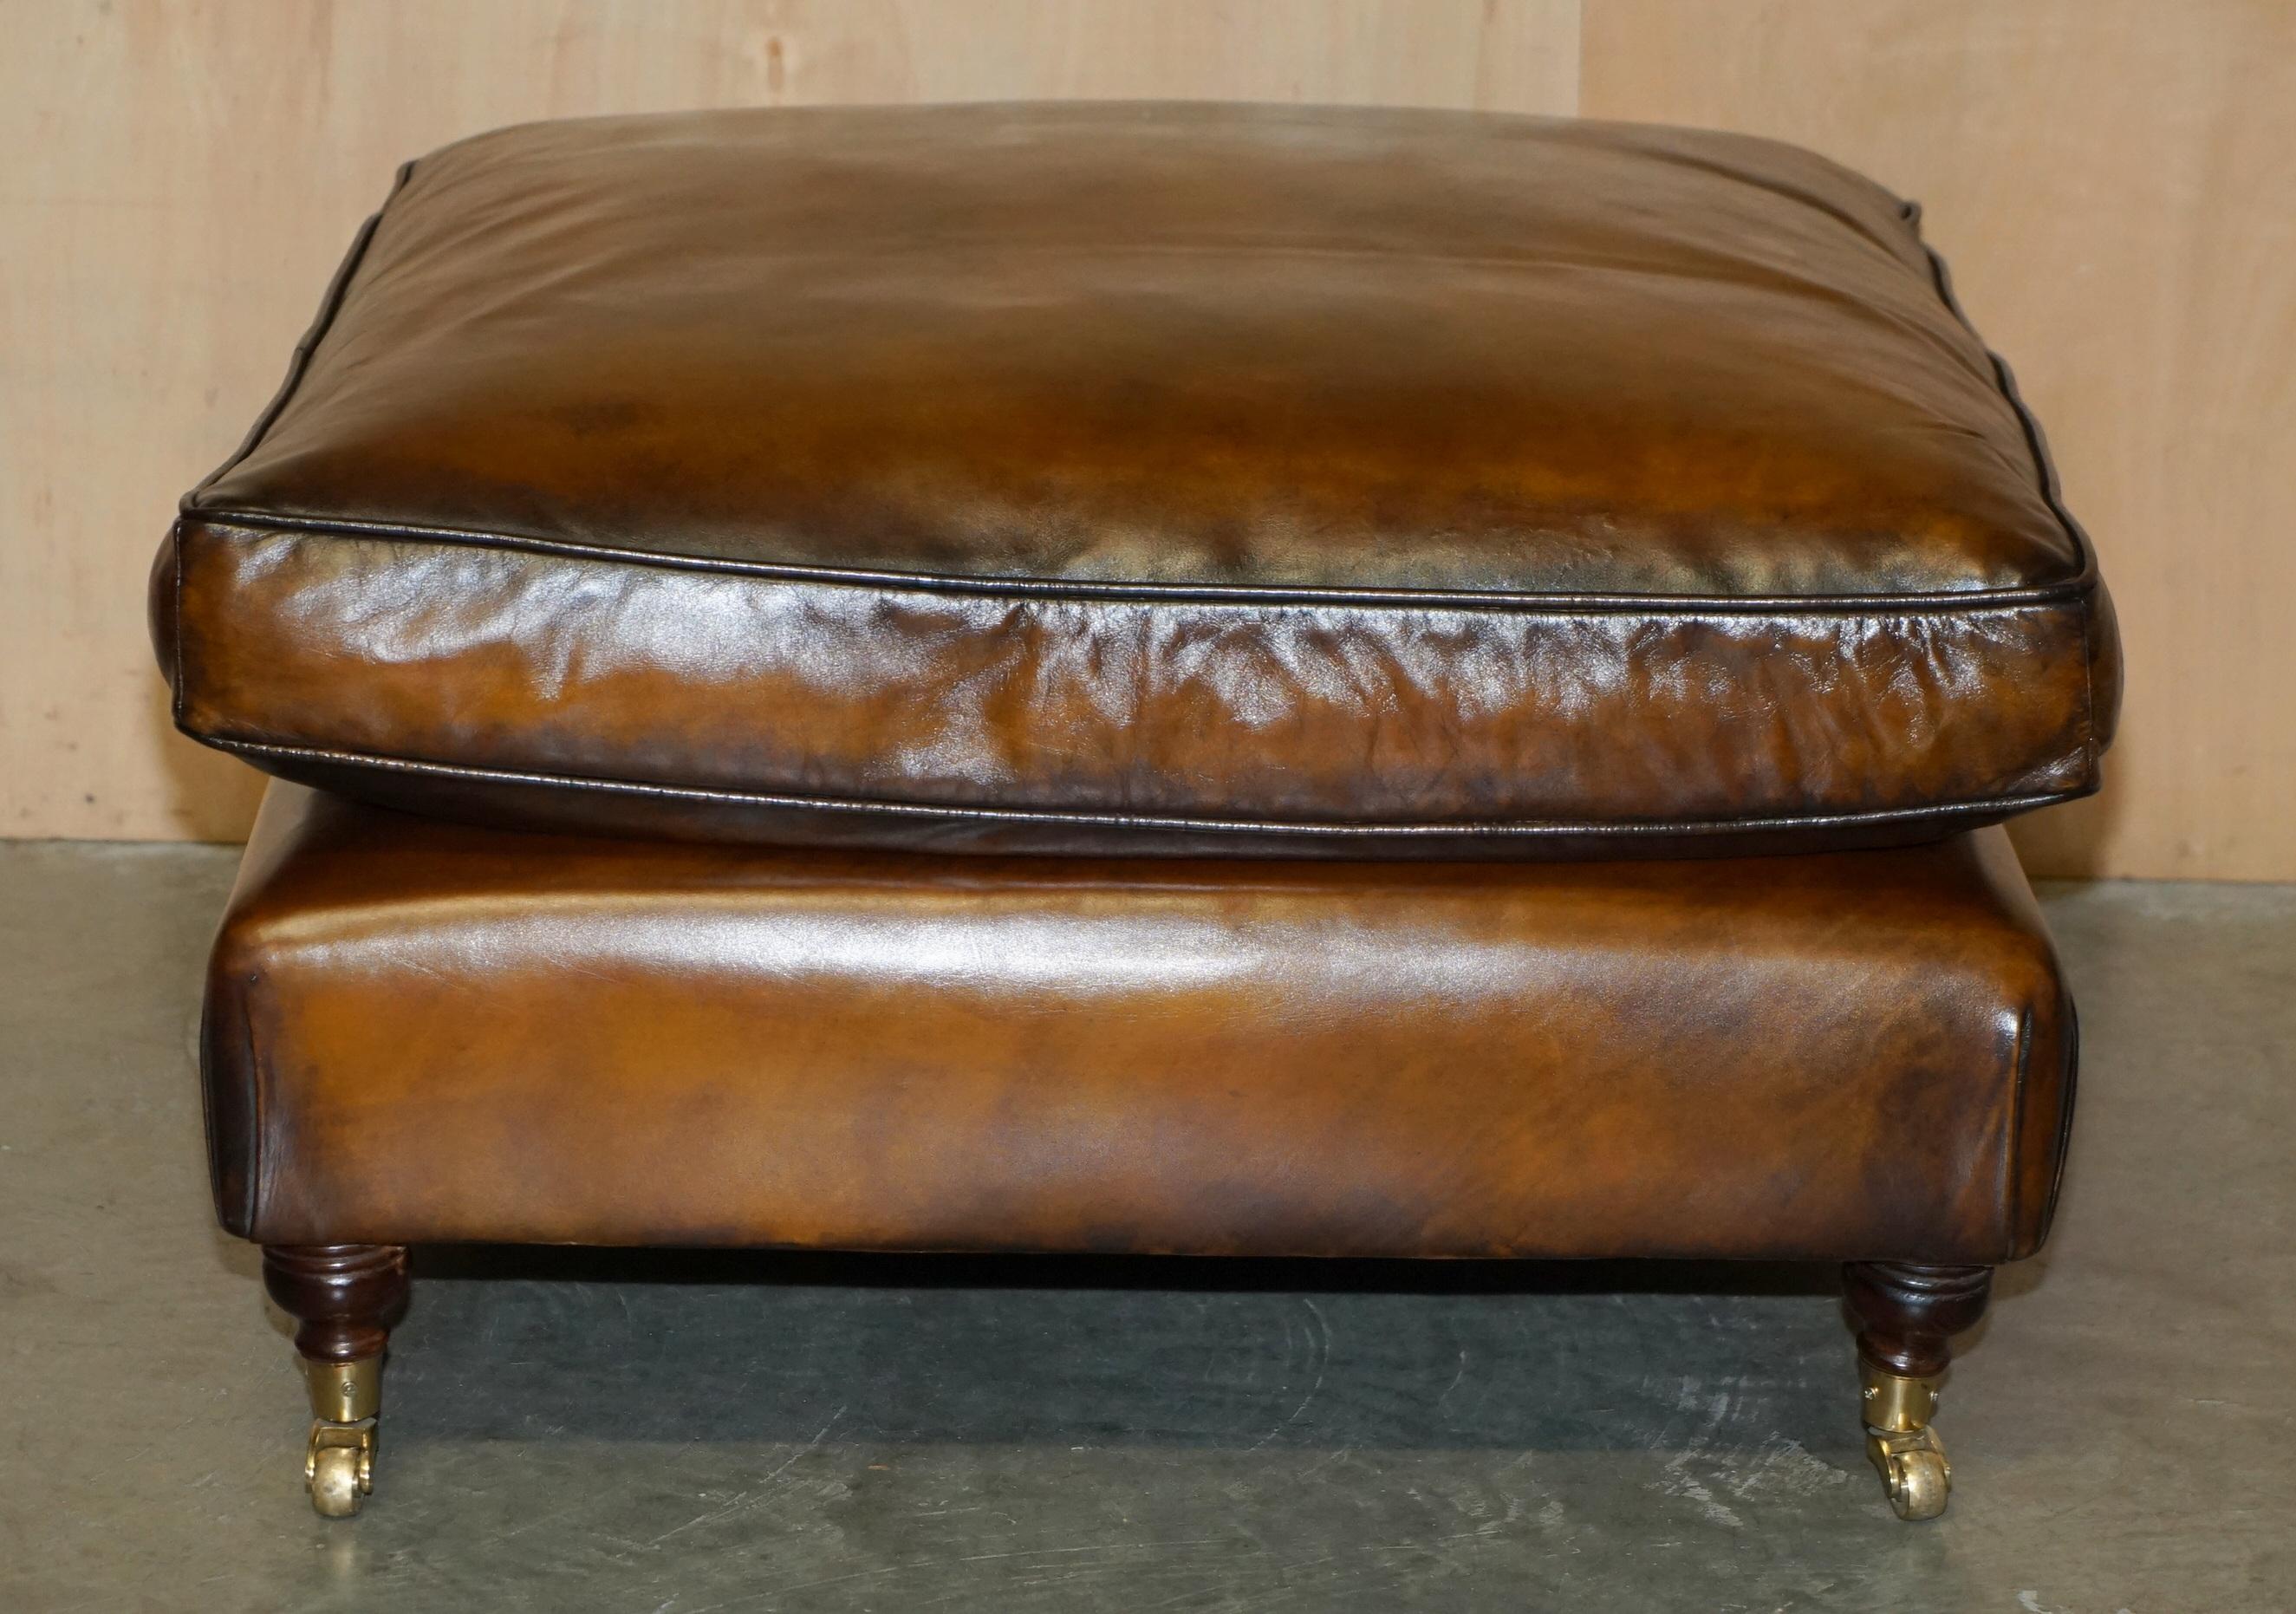 Royal House Antiques

Royal House Antiques is delighted to offer for sale this lovely vintage fully restored hand dyed brown leather, extra large ottoman footstool for four people with overstuffed feather filled cushion which is part of a